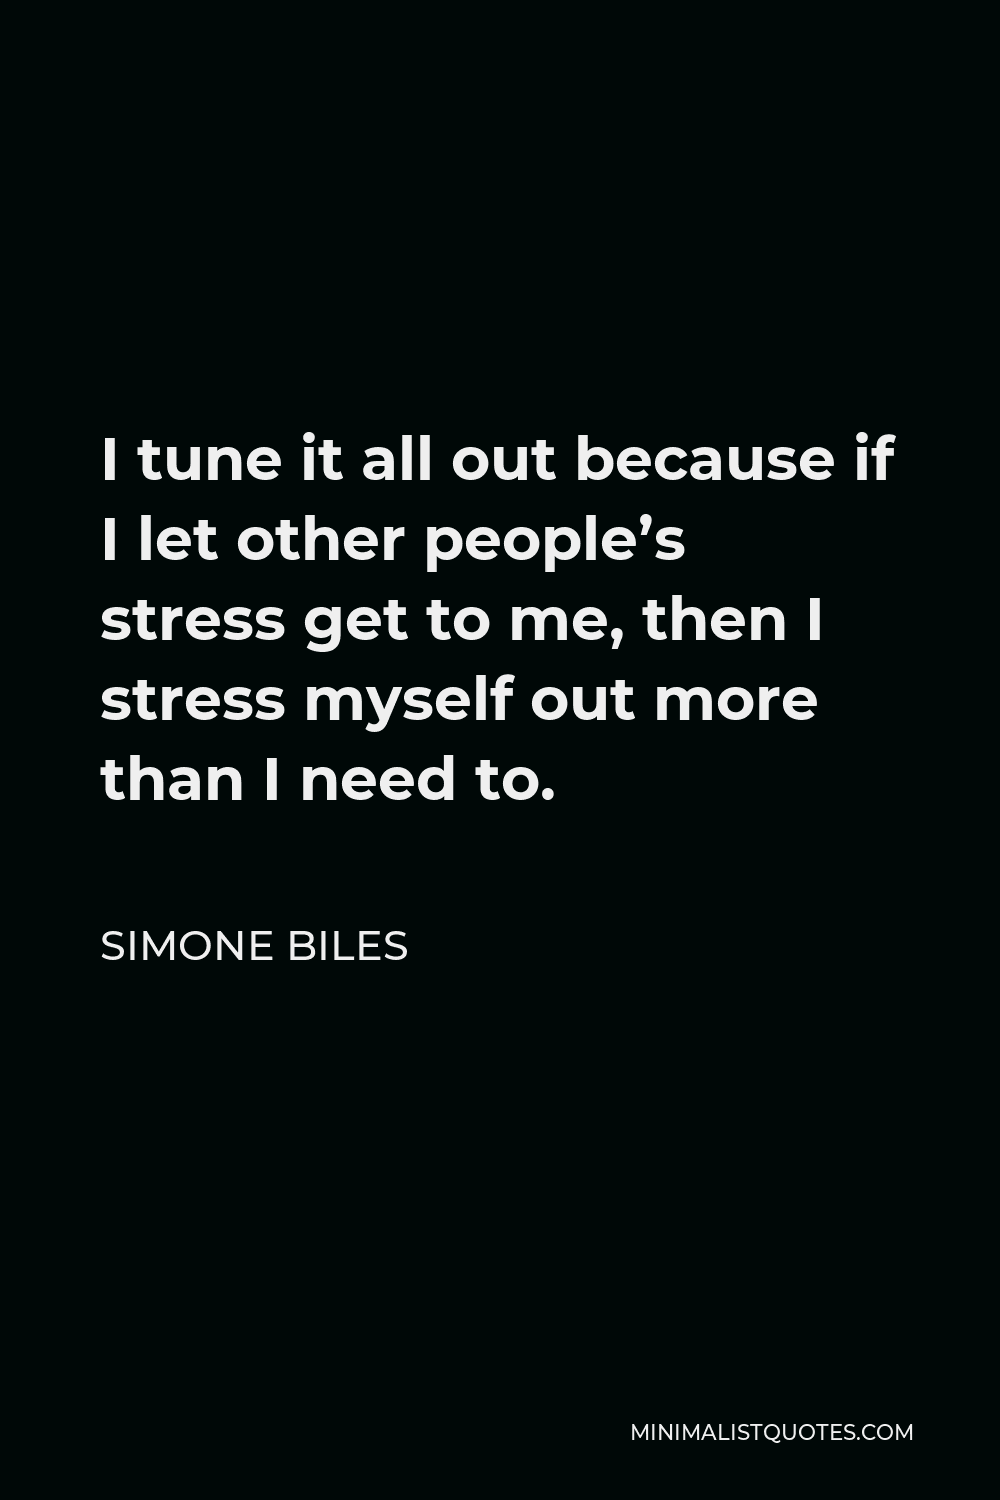 Simone Biles Quote - I tune it all out because if I let other people’s stress get to me, then I stress myself out more than I need to.